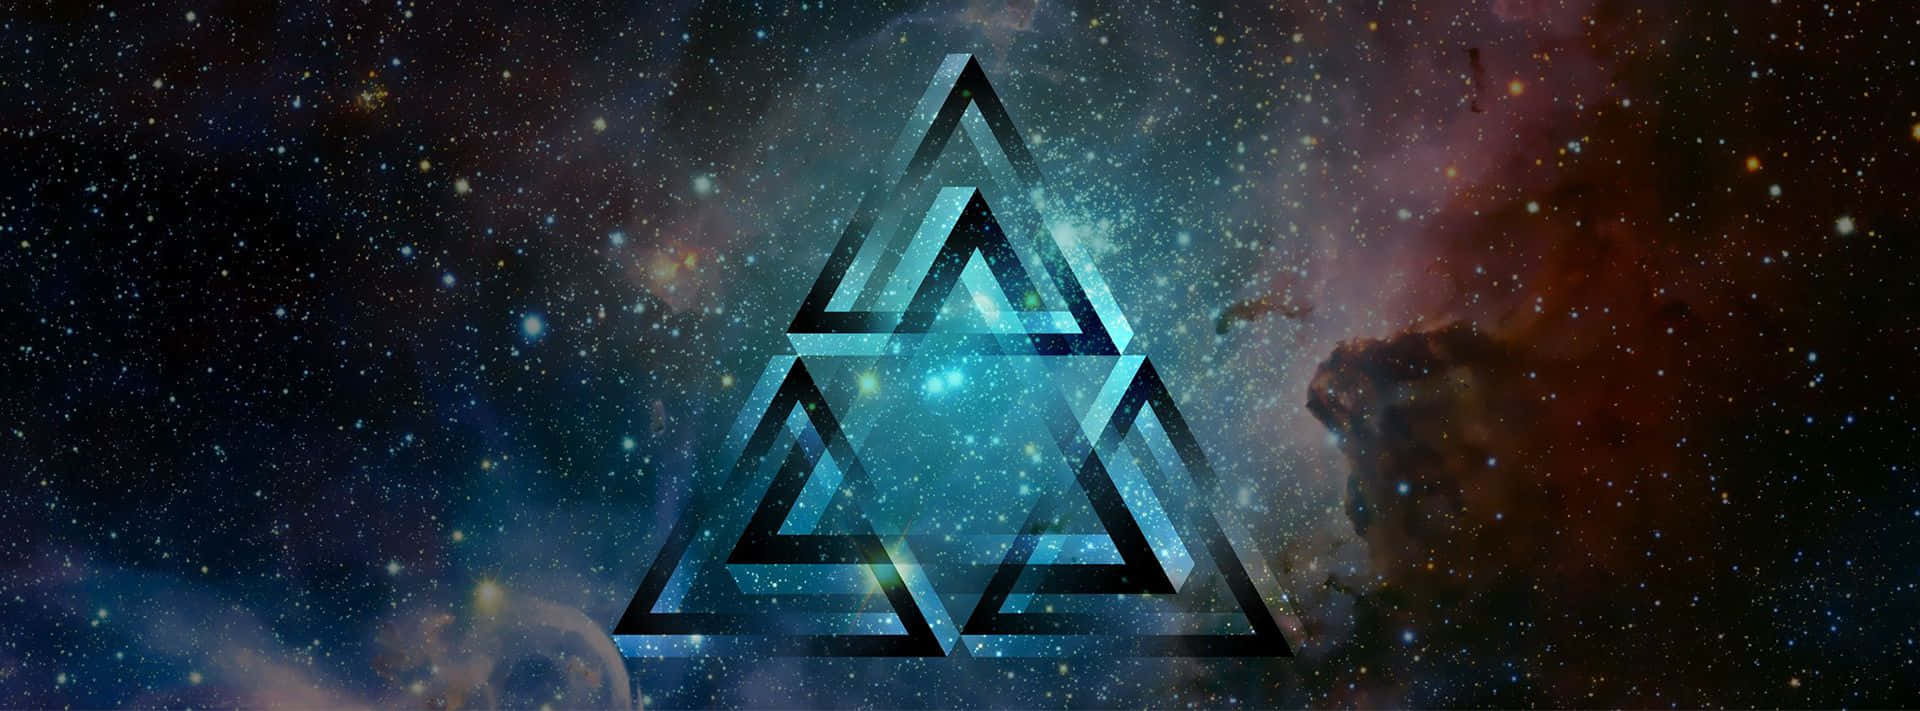 A Triangle With A Space Background